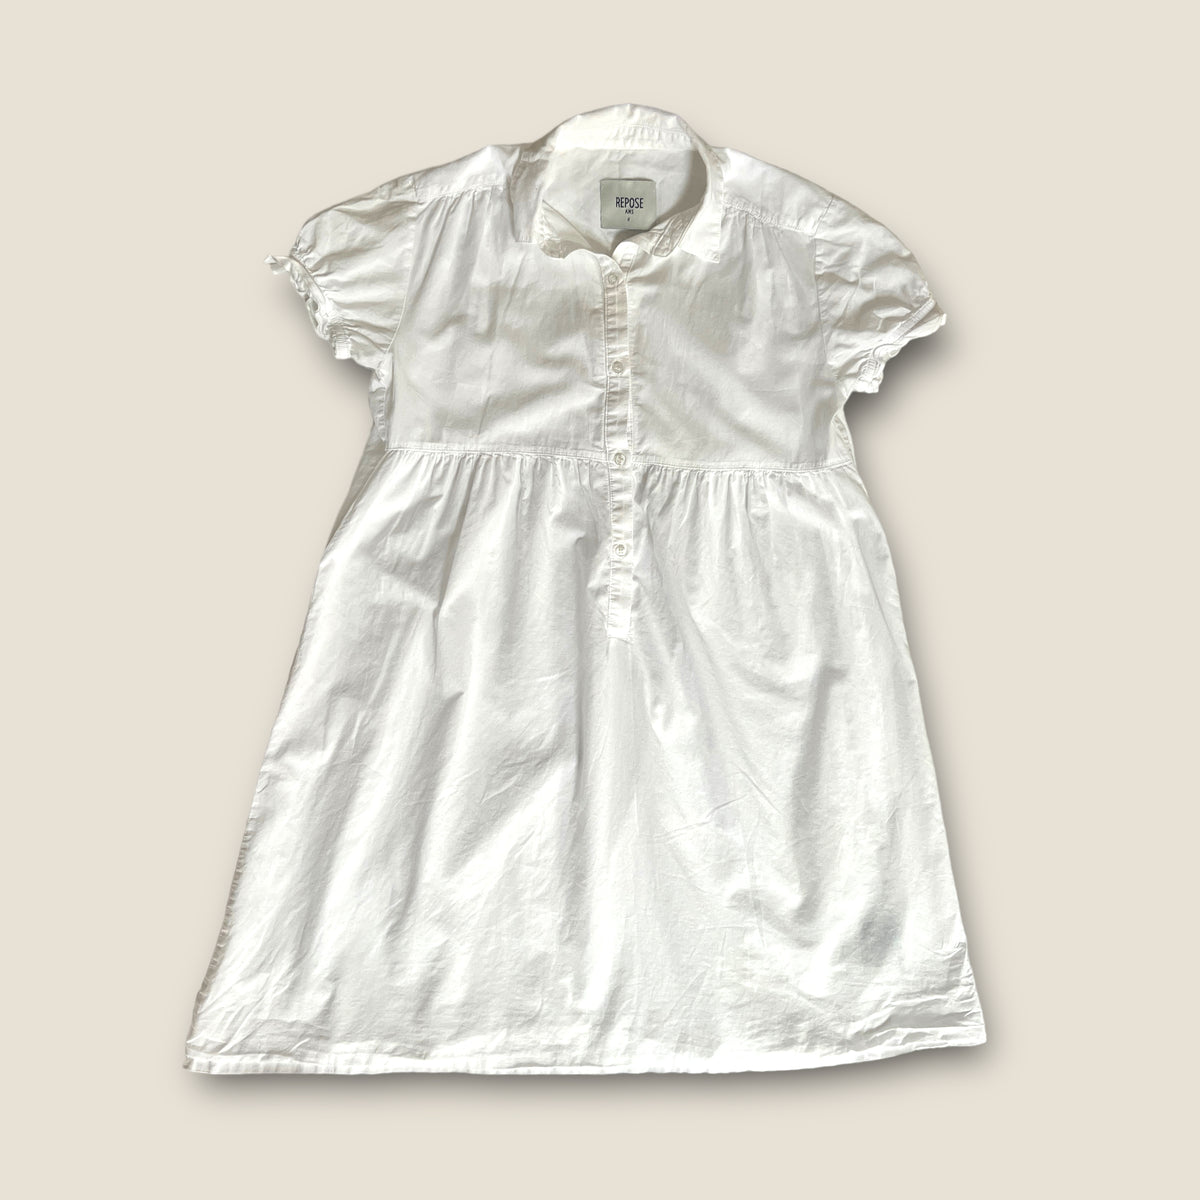 Repose Ams Cotton Dress size 8 years